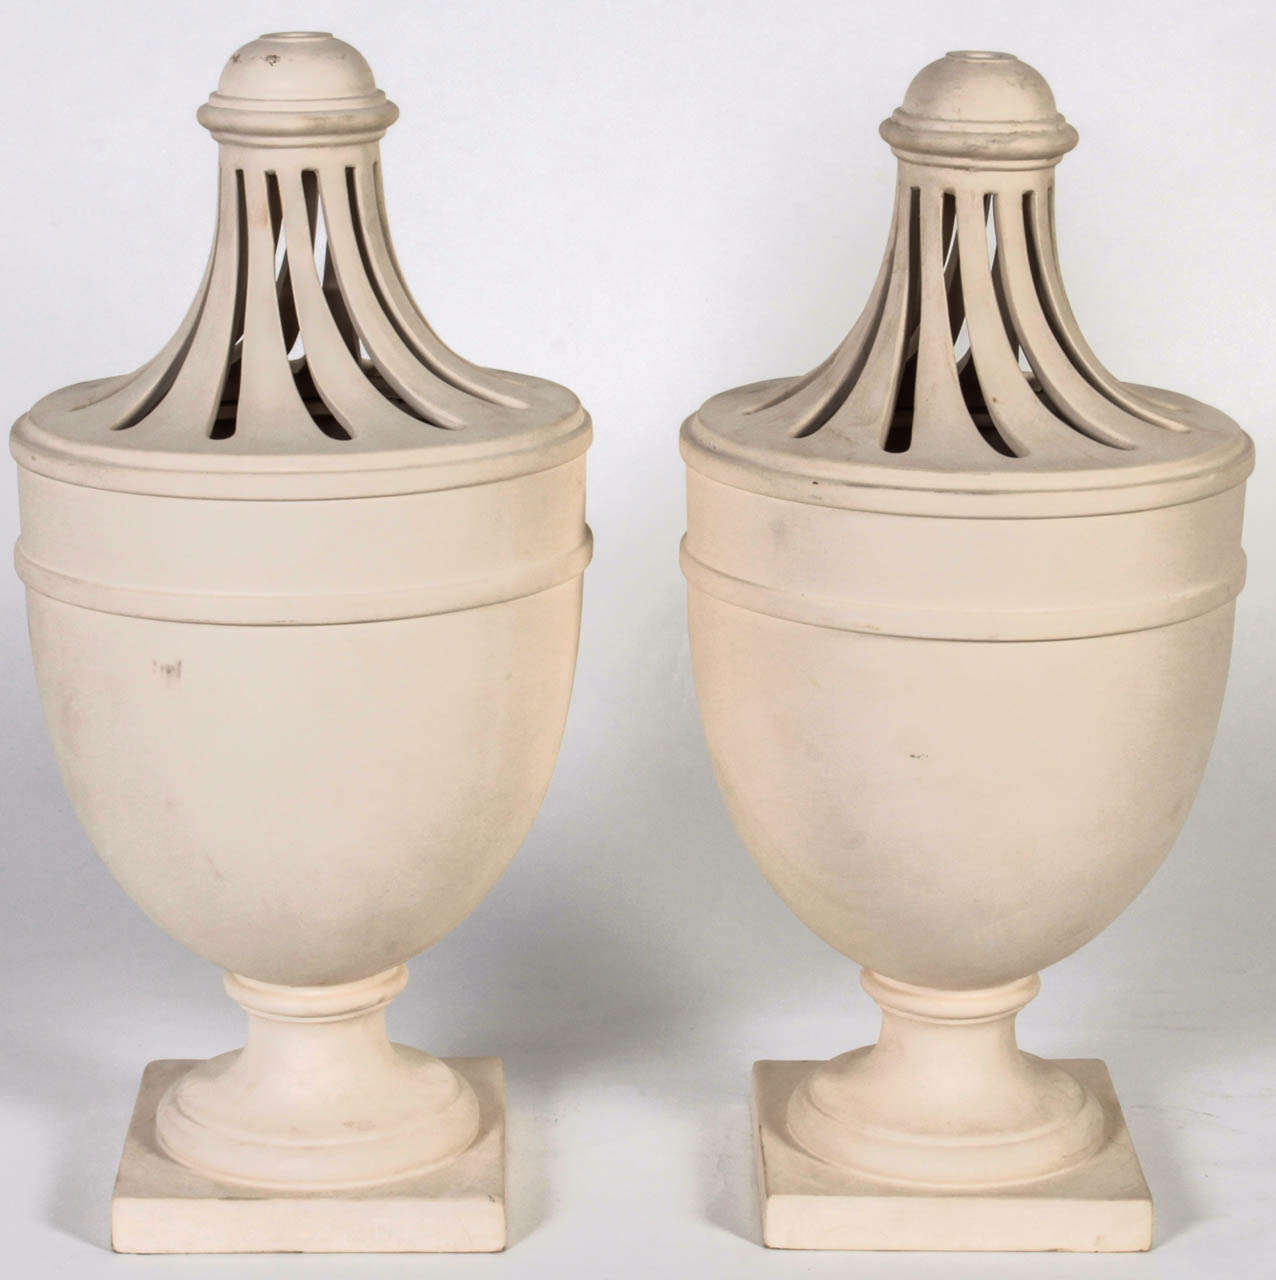 French 1940's Bisque pottery lamp bases in unglazed finish.
Good classical form
Can also be used as decorative finials